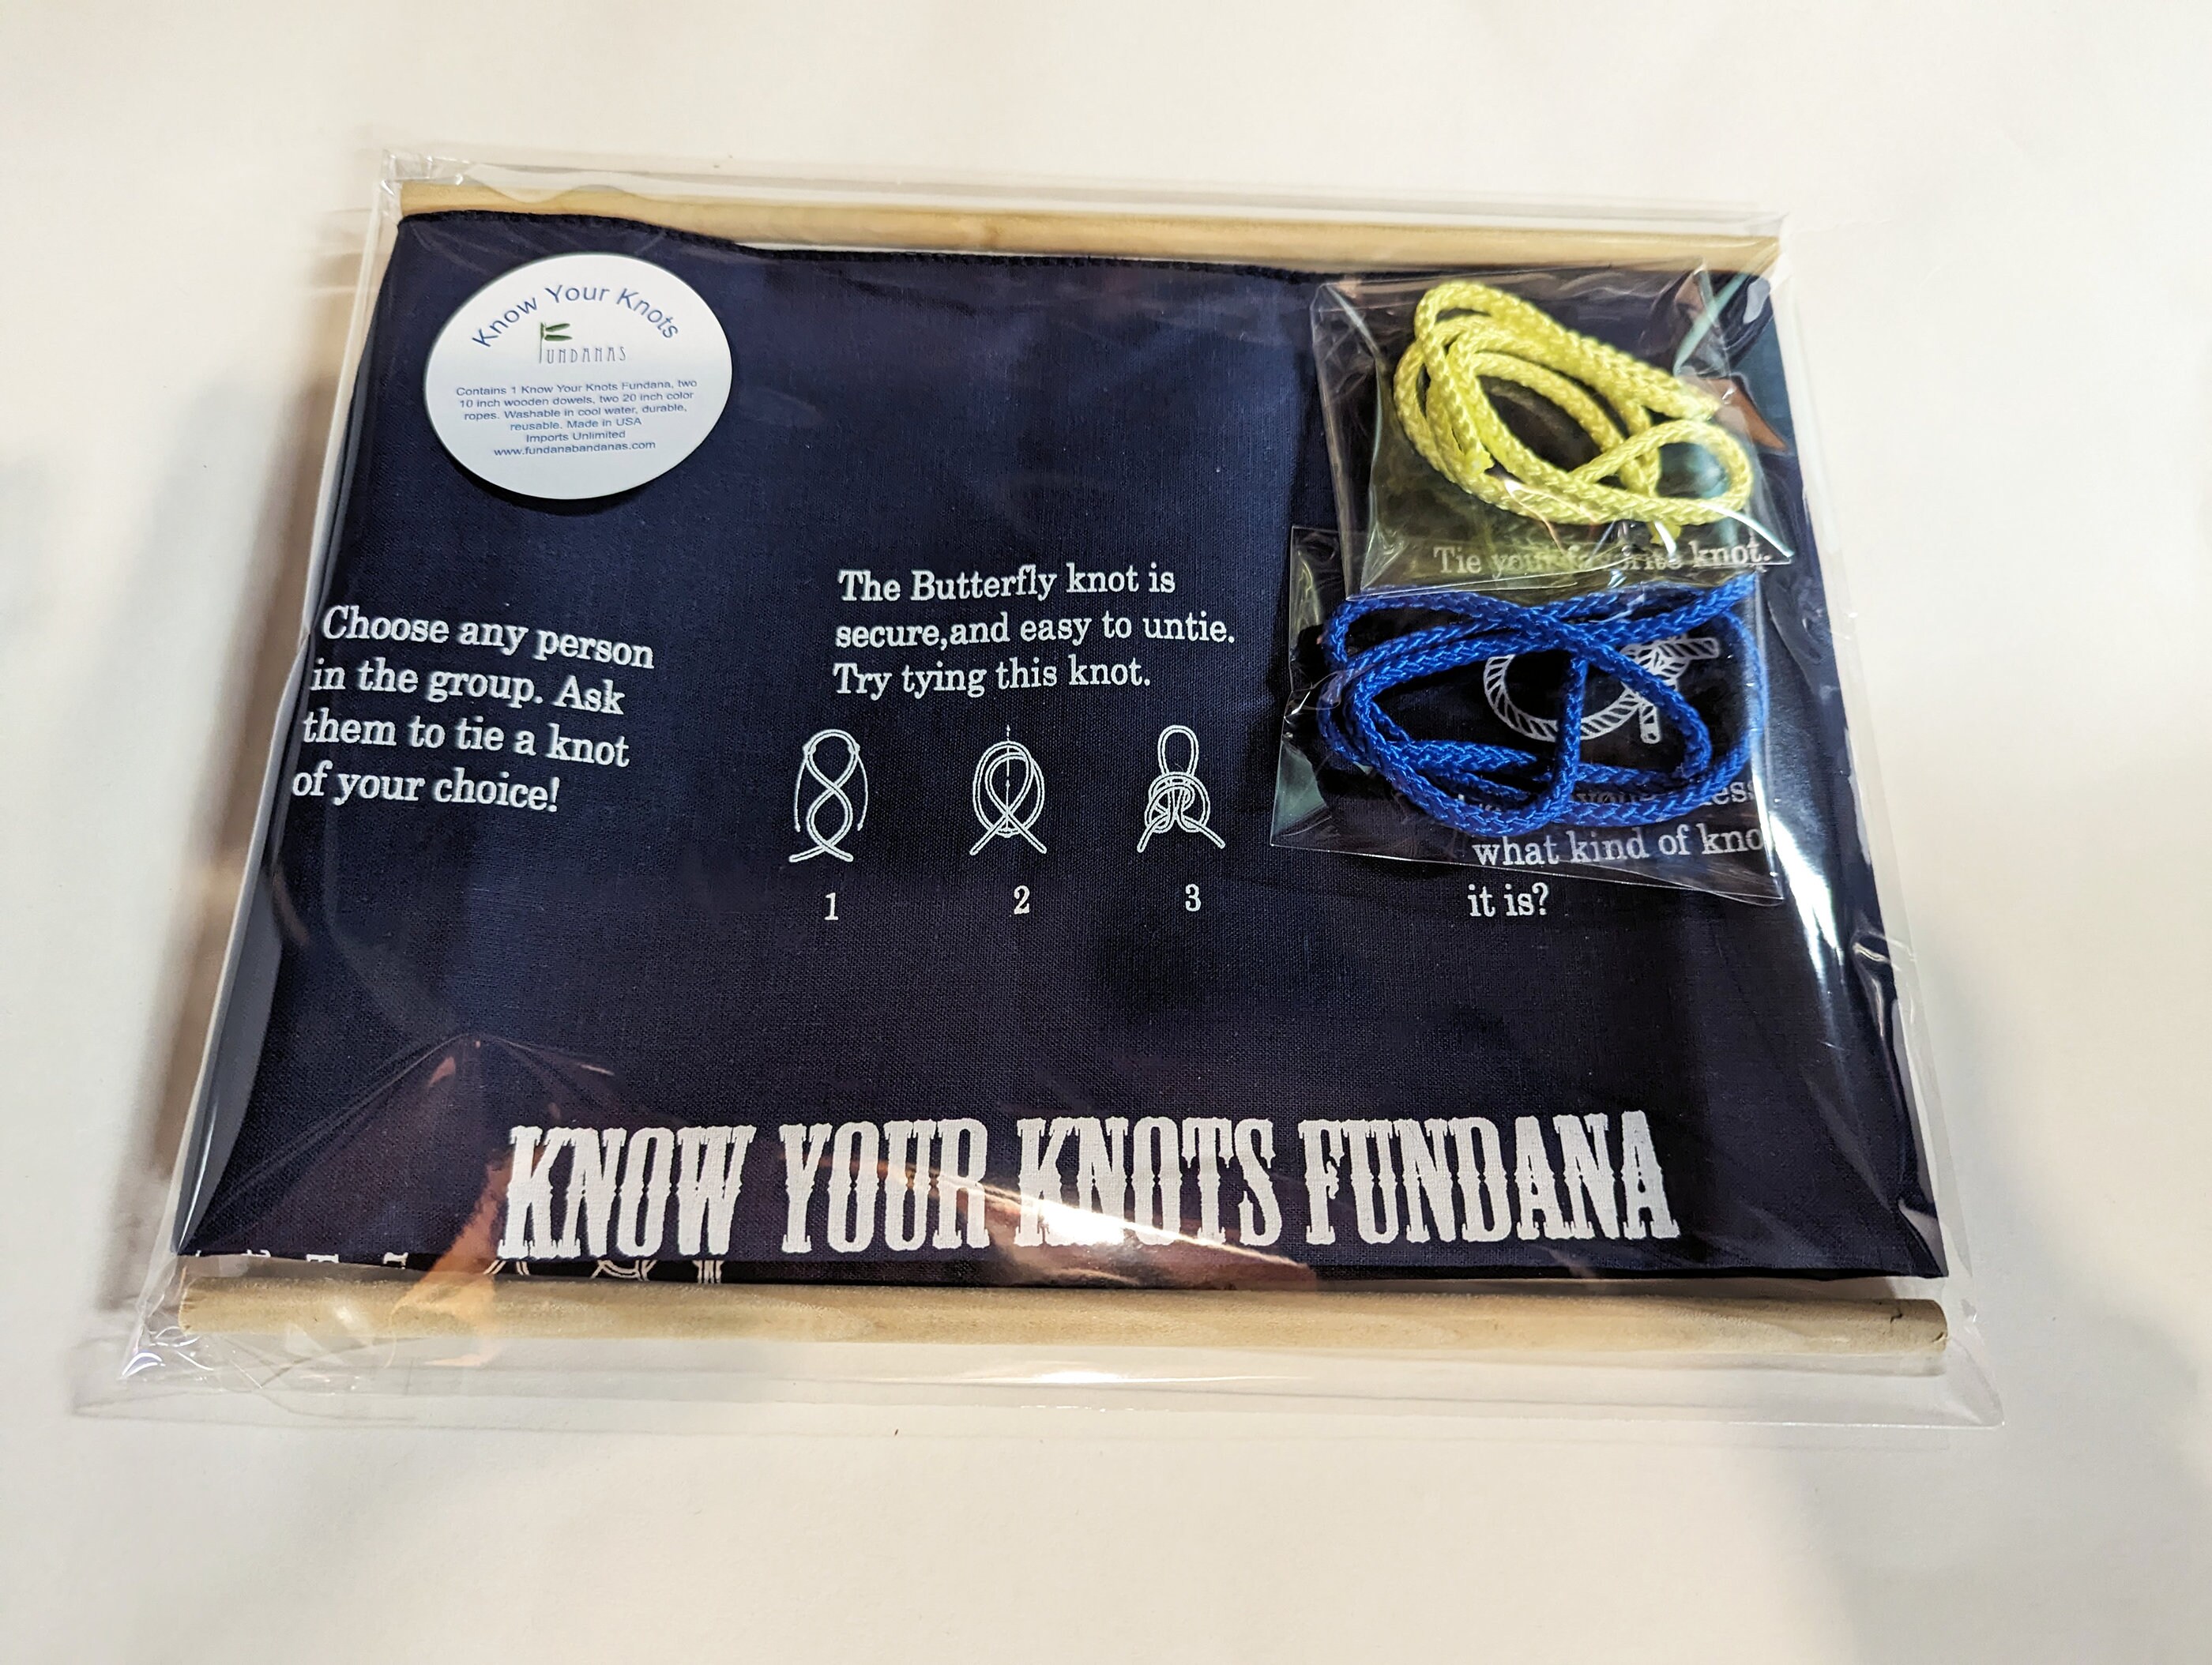 New! Knot Tying Kits! Know Your Knots Fundana game, color practice